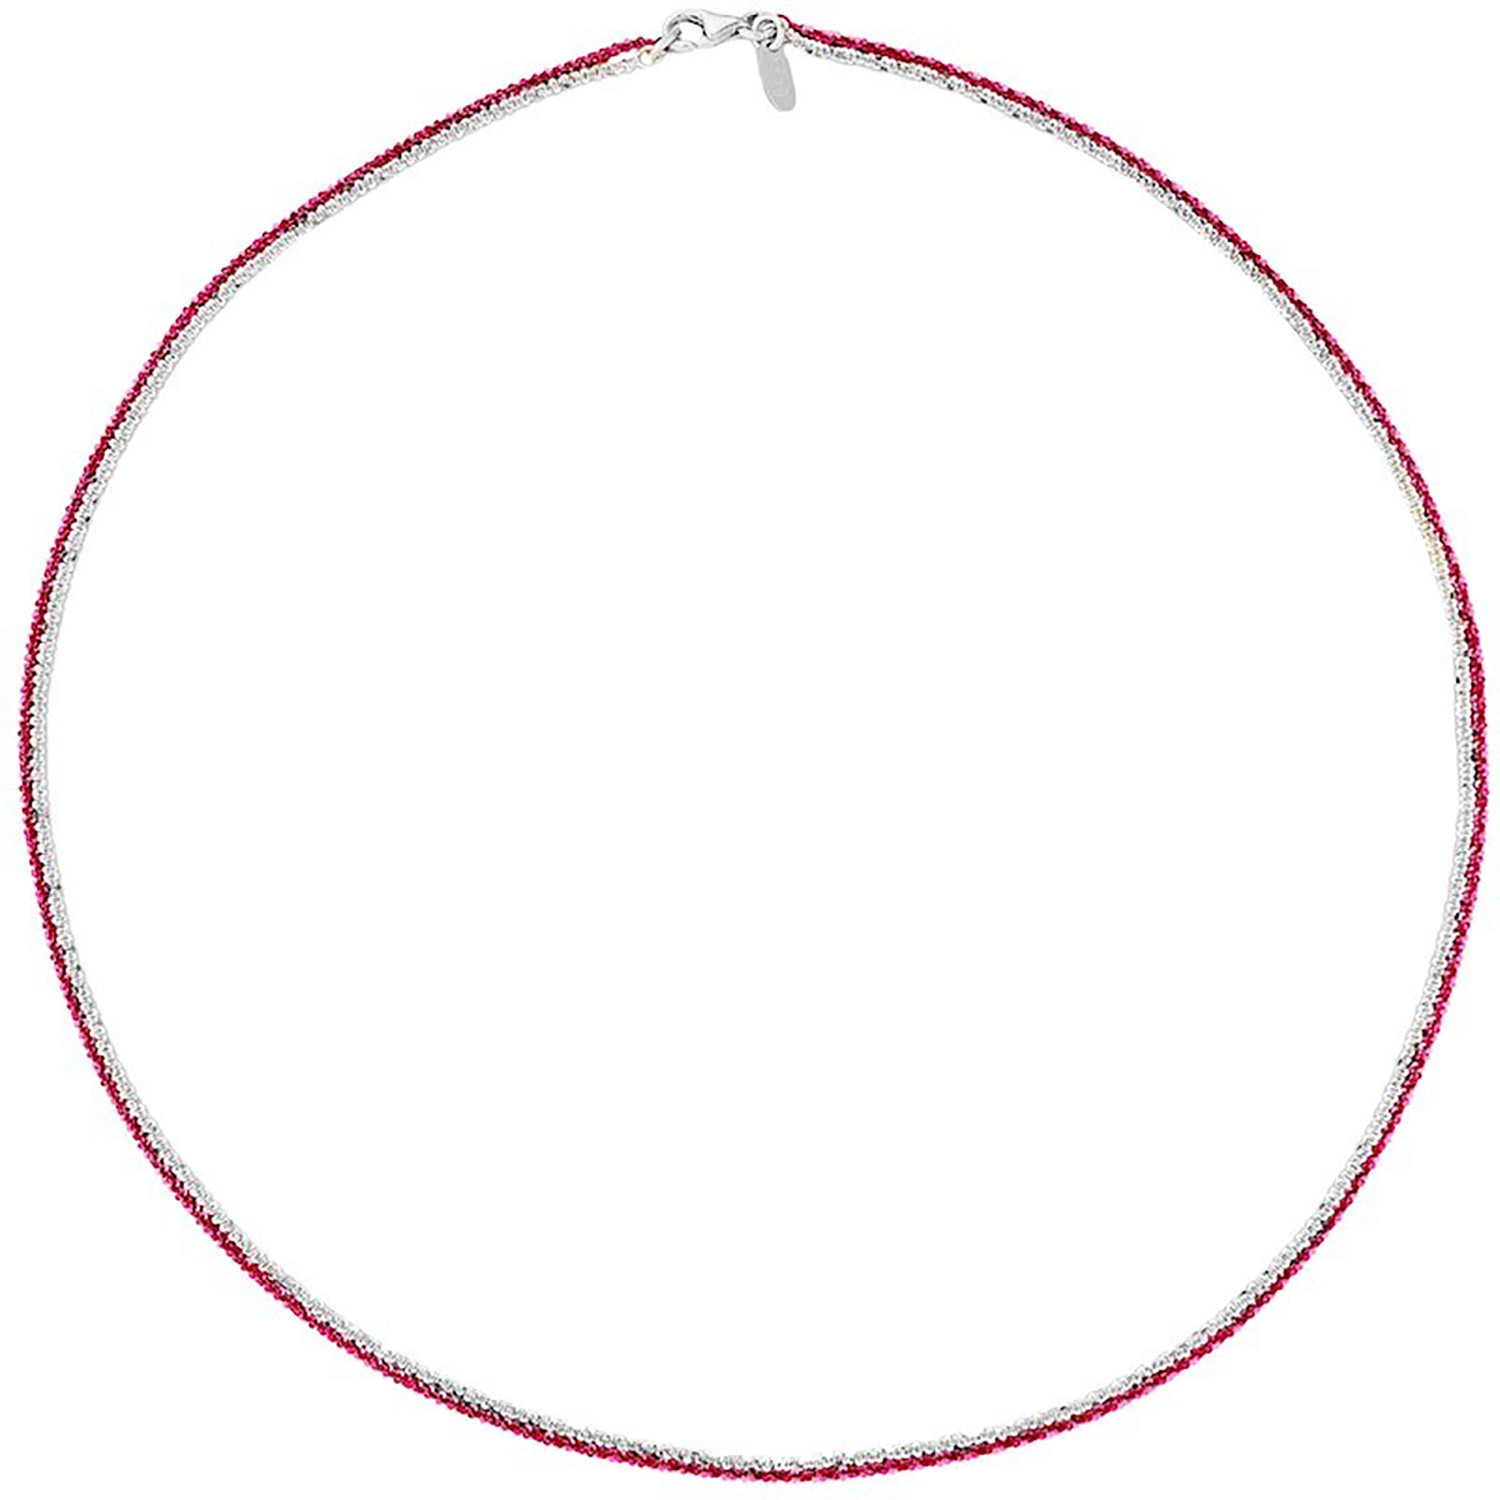 Collier Elden argent 925/1000 2 rangs blanc/rose
collection Catch the Rainbow